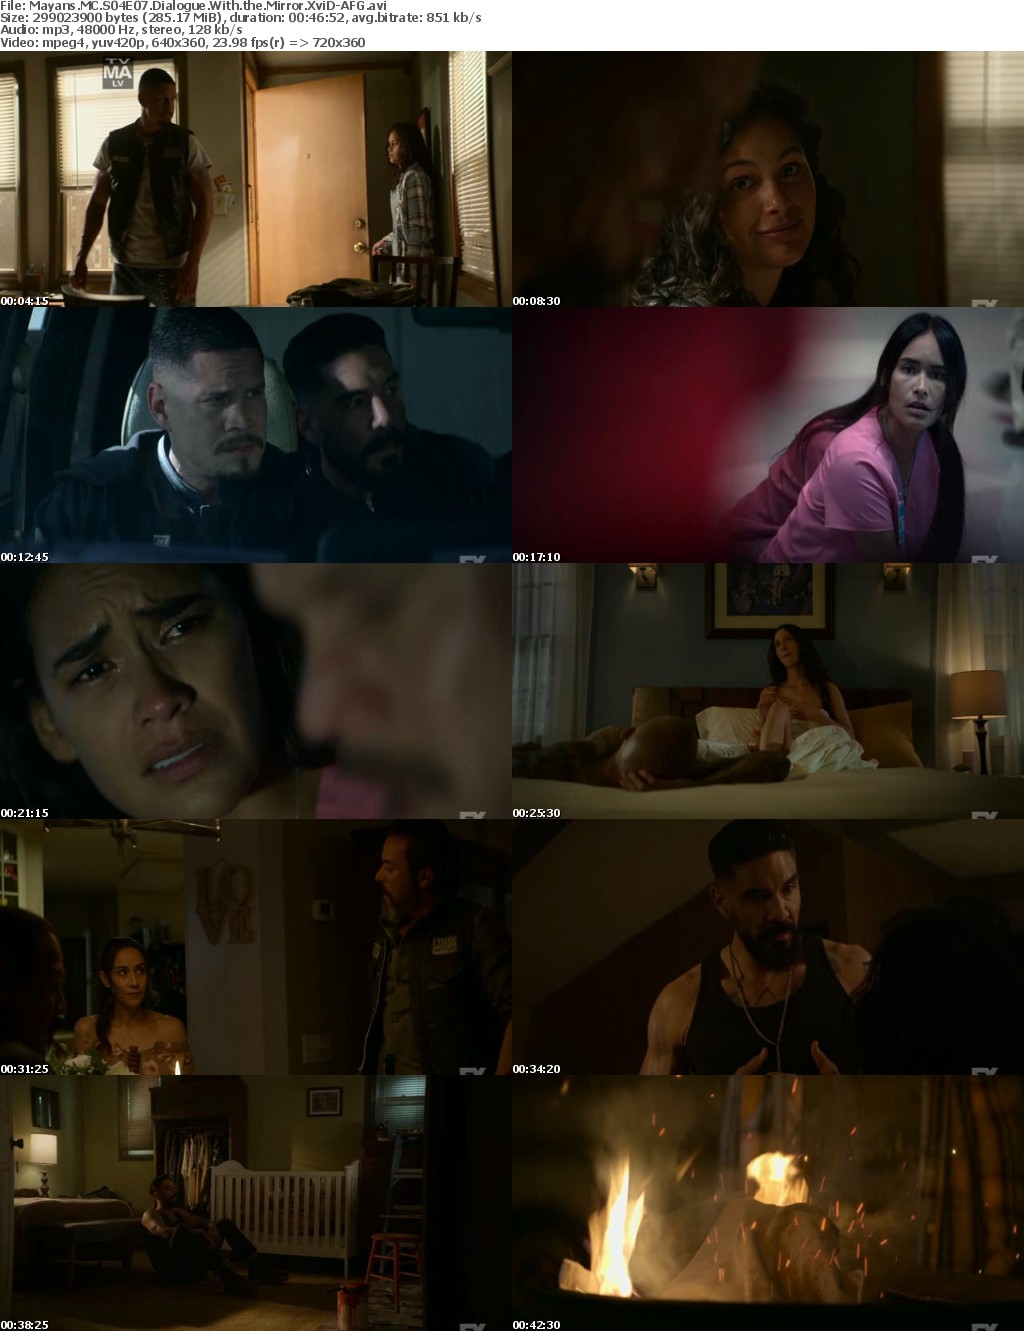 Mayans MC S04E07 Dialogue With the Mirror XviD-AFG